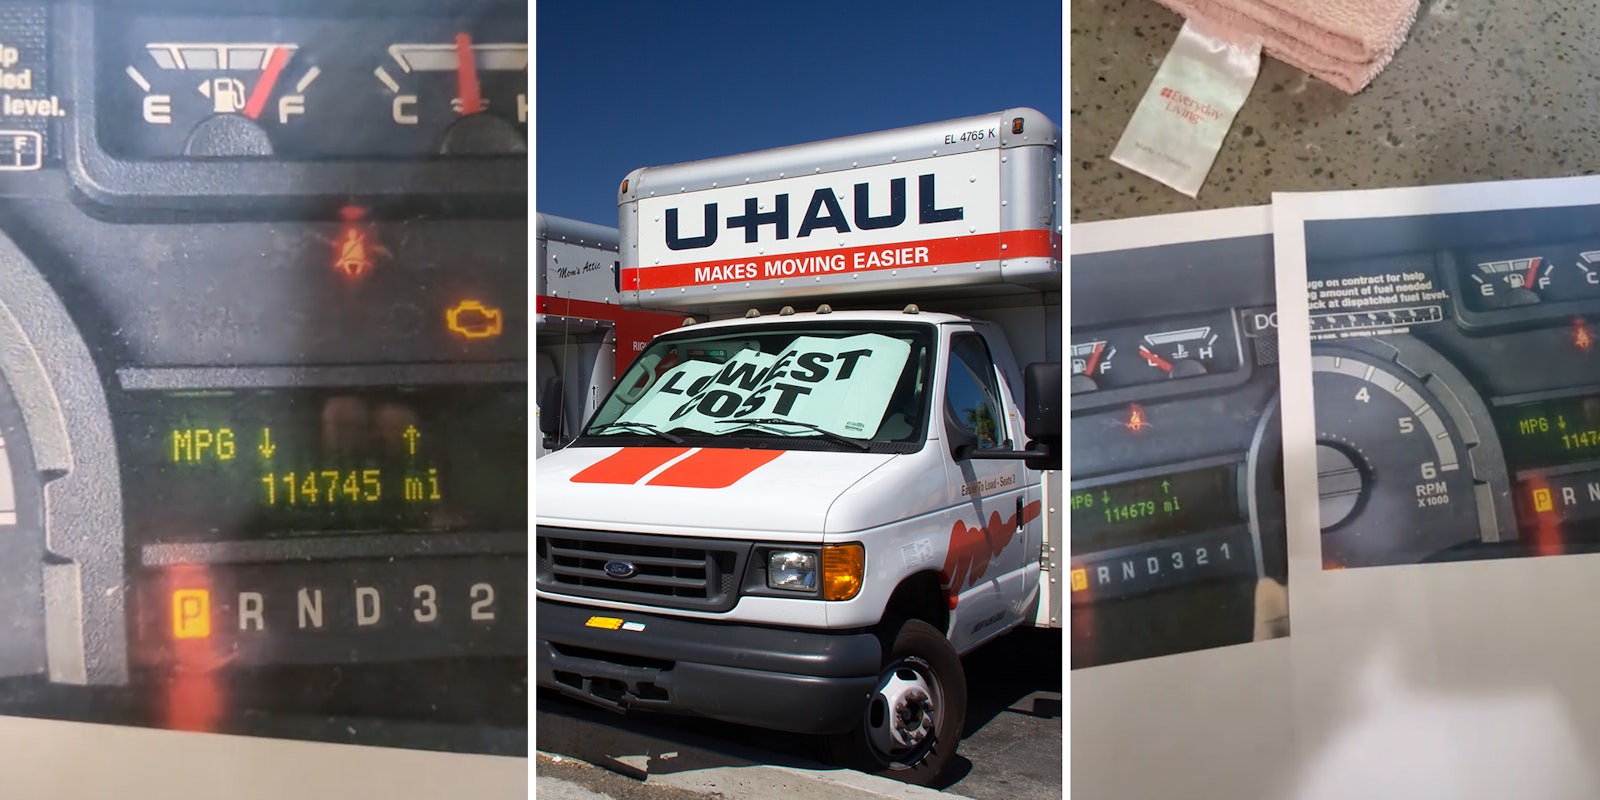 Man says U-Haul tried to charge him $30 for gas. But he got photos of tank right before returning it